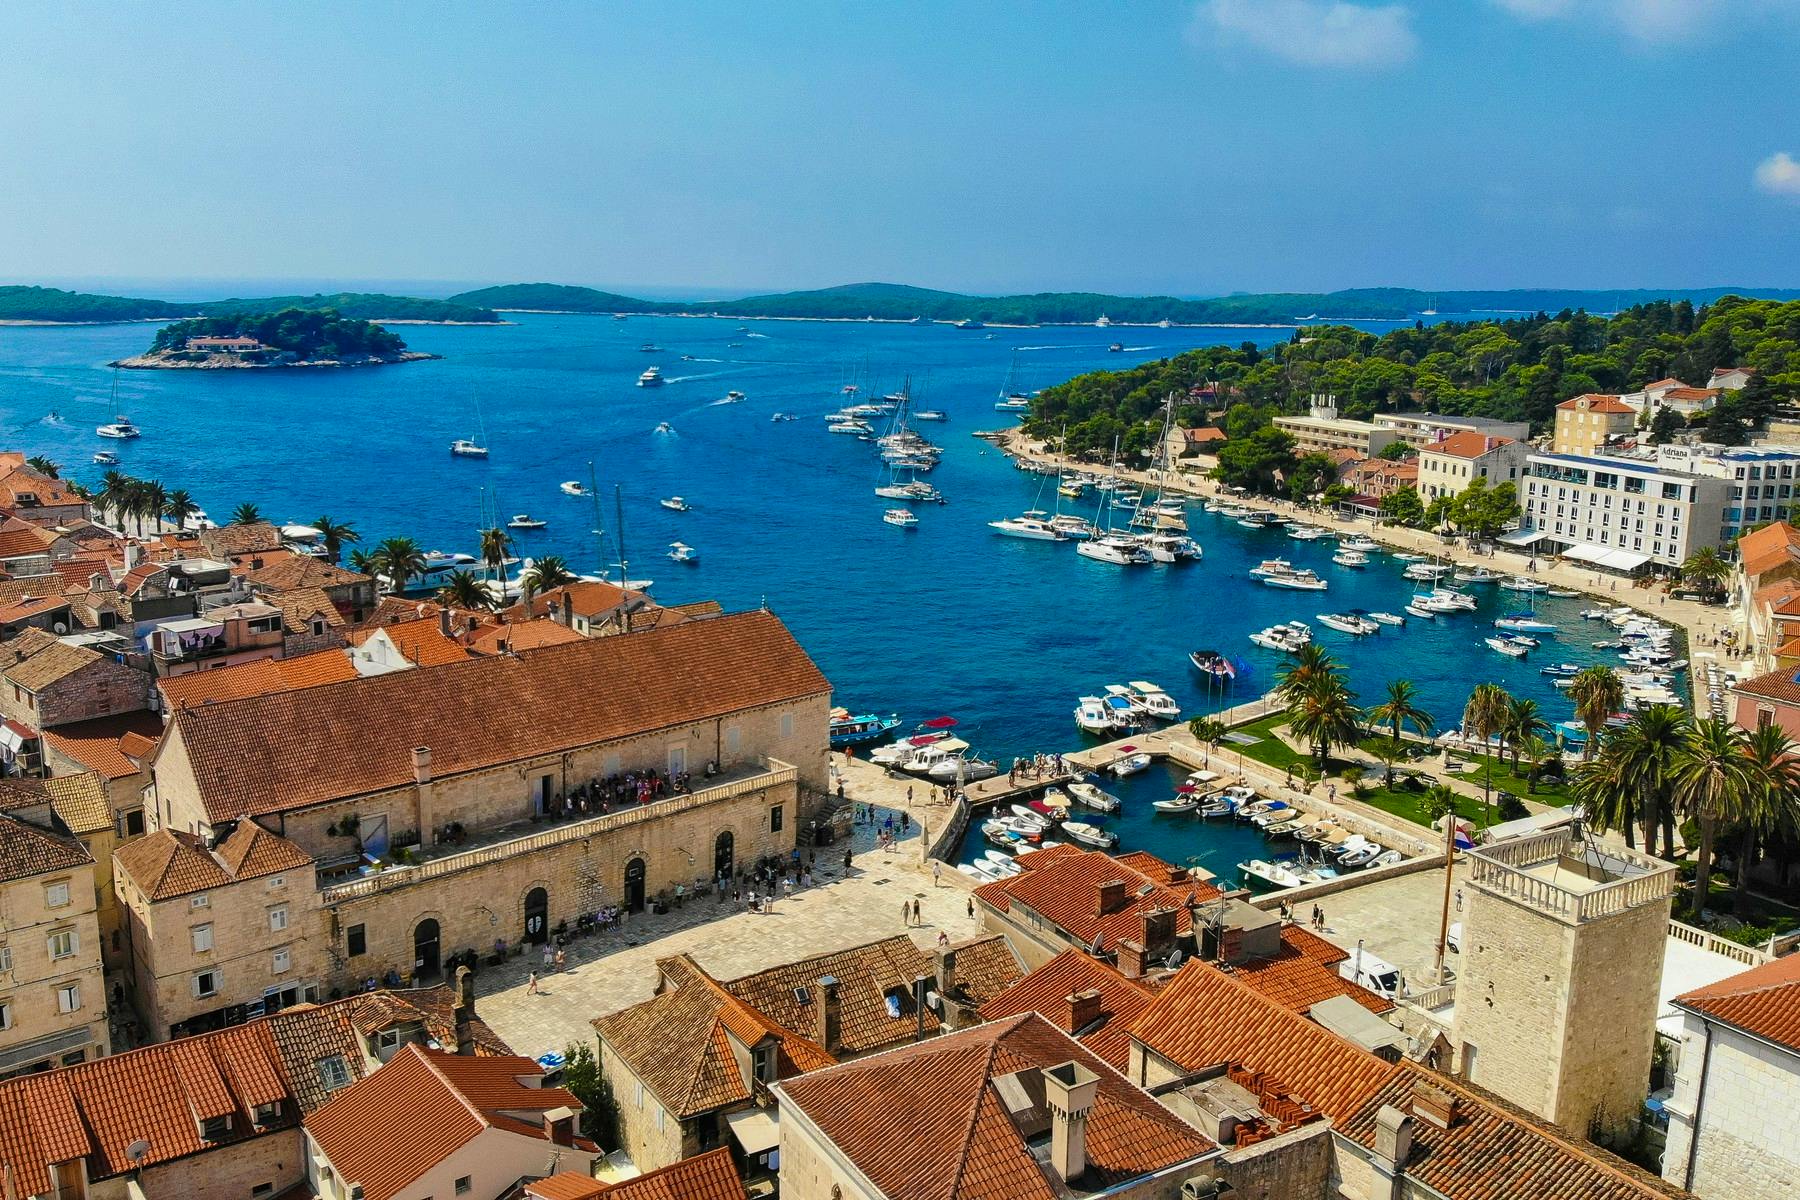 Spectacular view of Hvar town and Pakleni islands